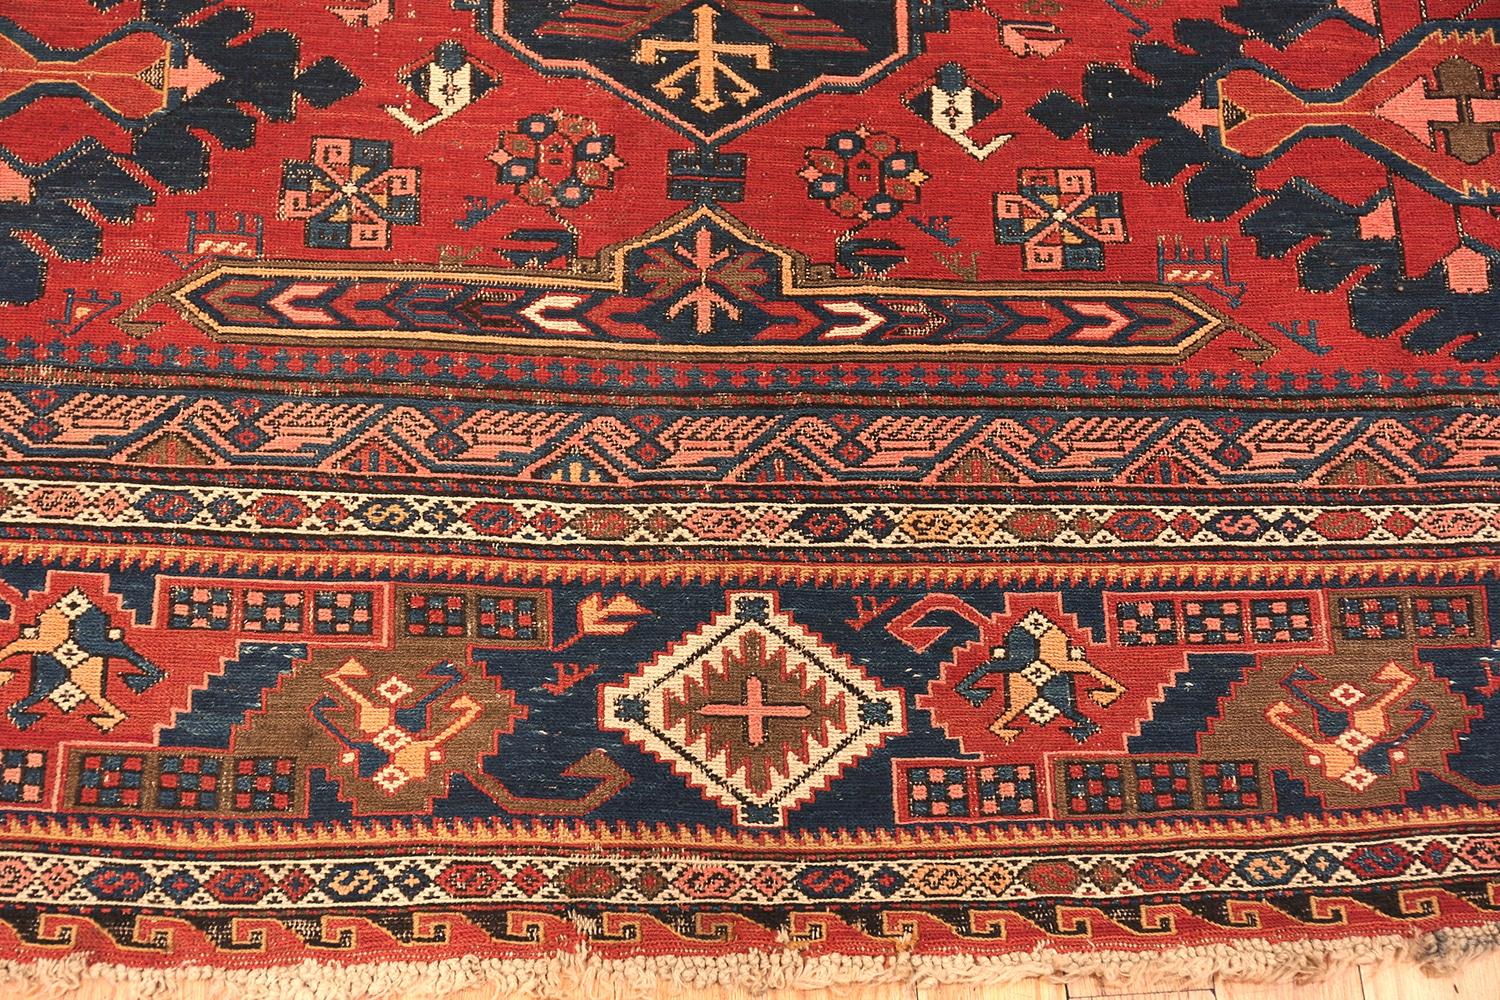 Beautiful antique tribal Soumak rug, country of origin: Caucasus, date circa 1900. Size: 9 ft. 2 in x 11 ft. 4 in (2.79 m x 3.45 m). 

This gorgeous tribal rug from the Caucasian mountains was created around the turn of the 20th century. It features